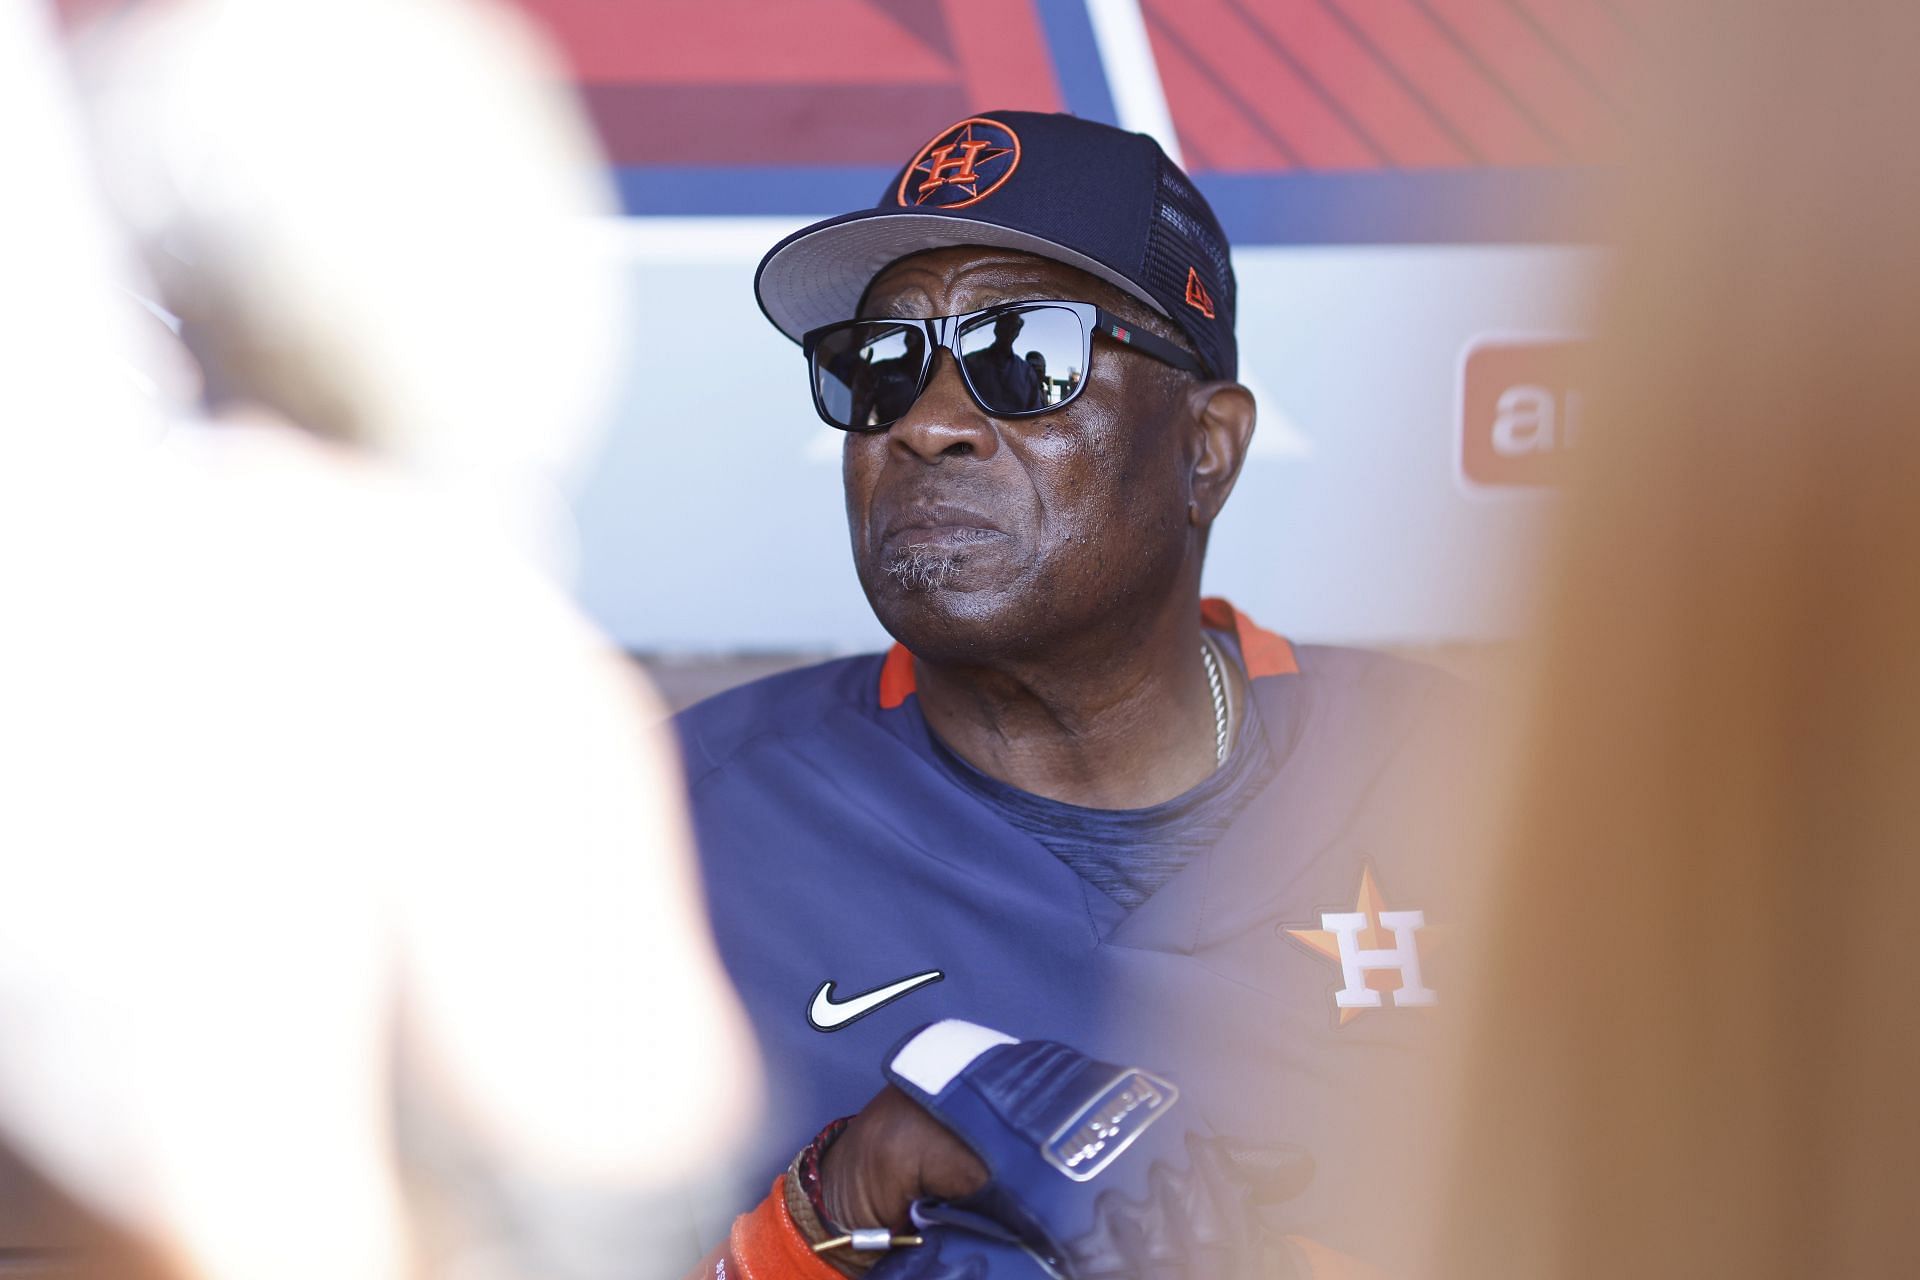 Houston Astros manager Dusty Baker has become the first African American manager in history to win 2000 games as a manager.